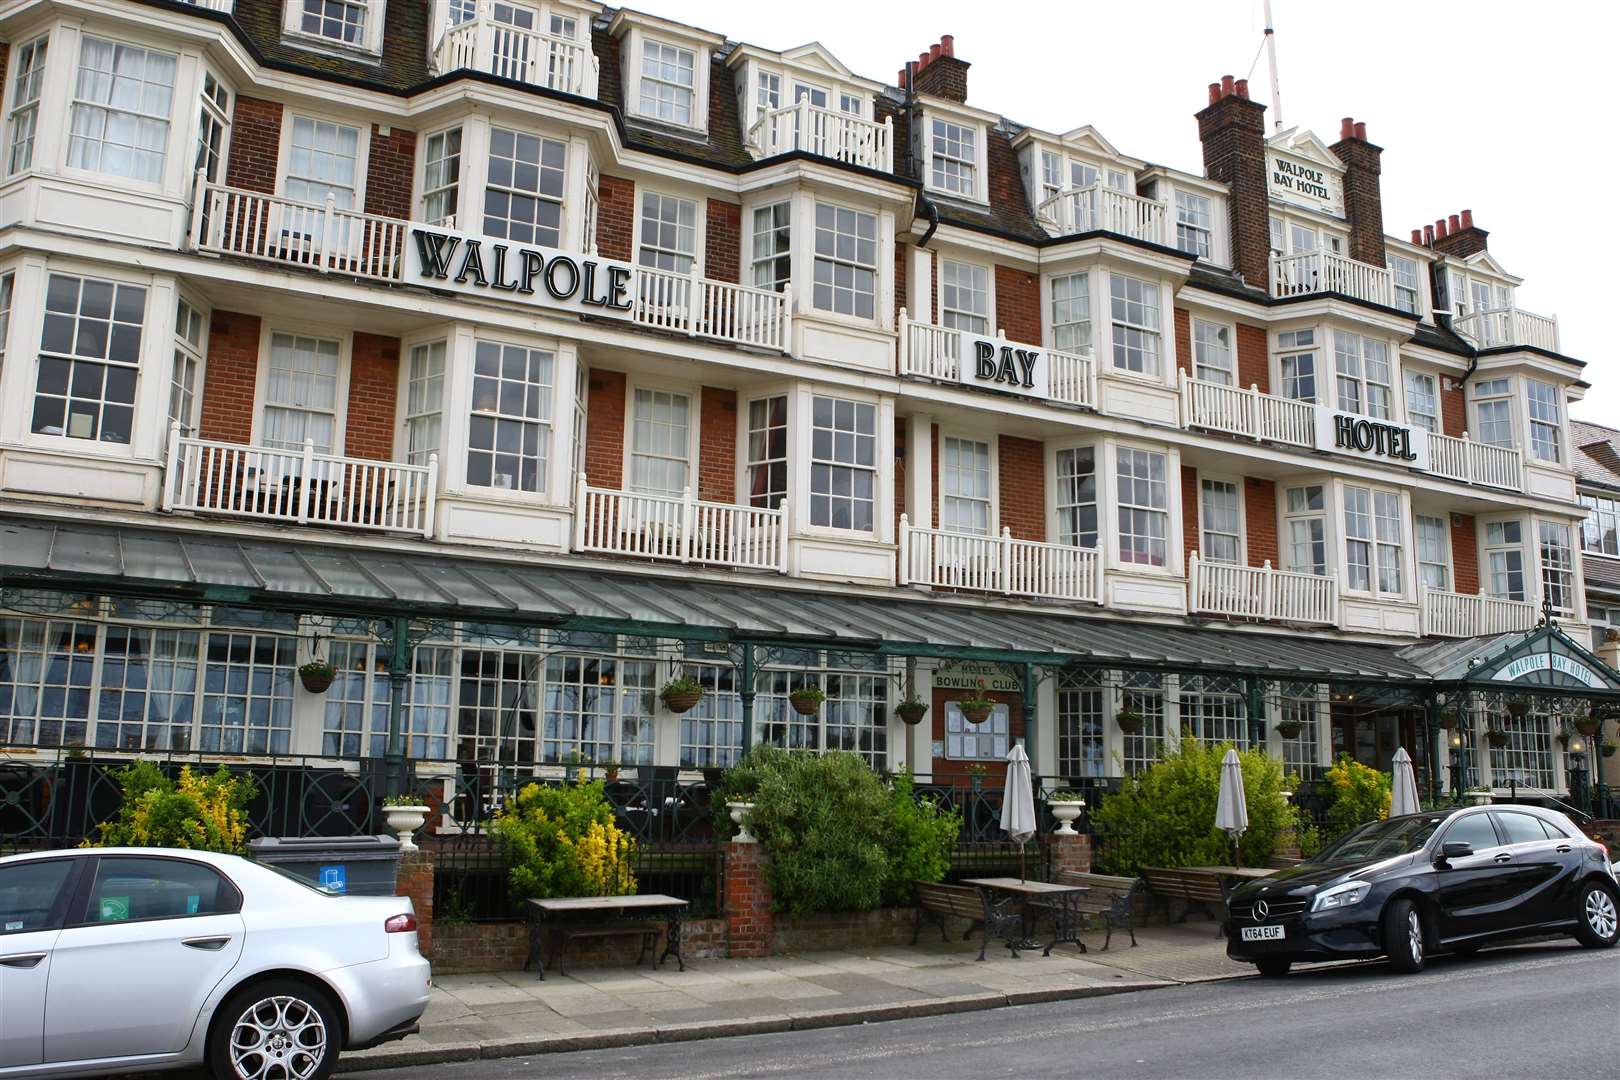 Walpole Bay Hotel is another of the filming locations. Picture: Matt Bristow